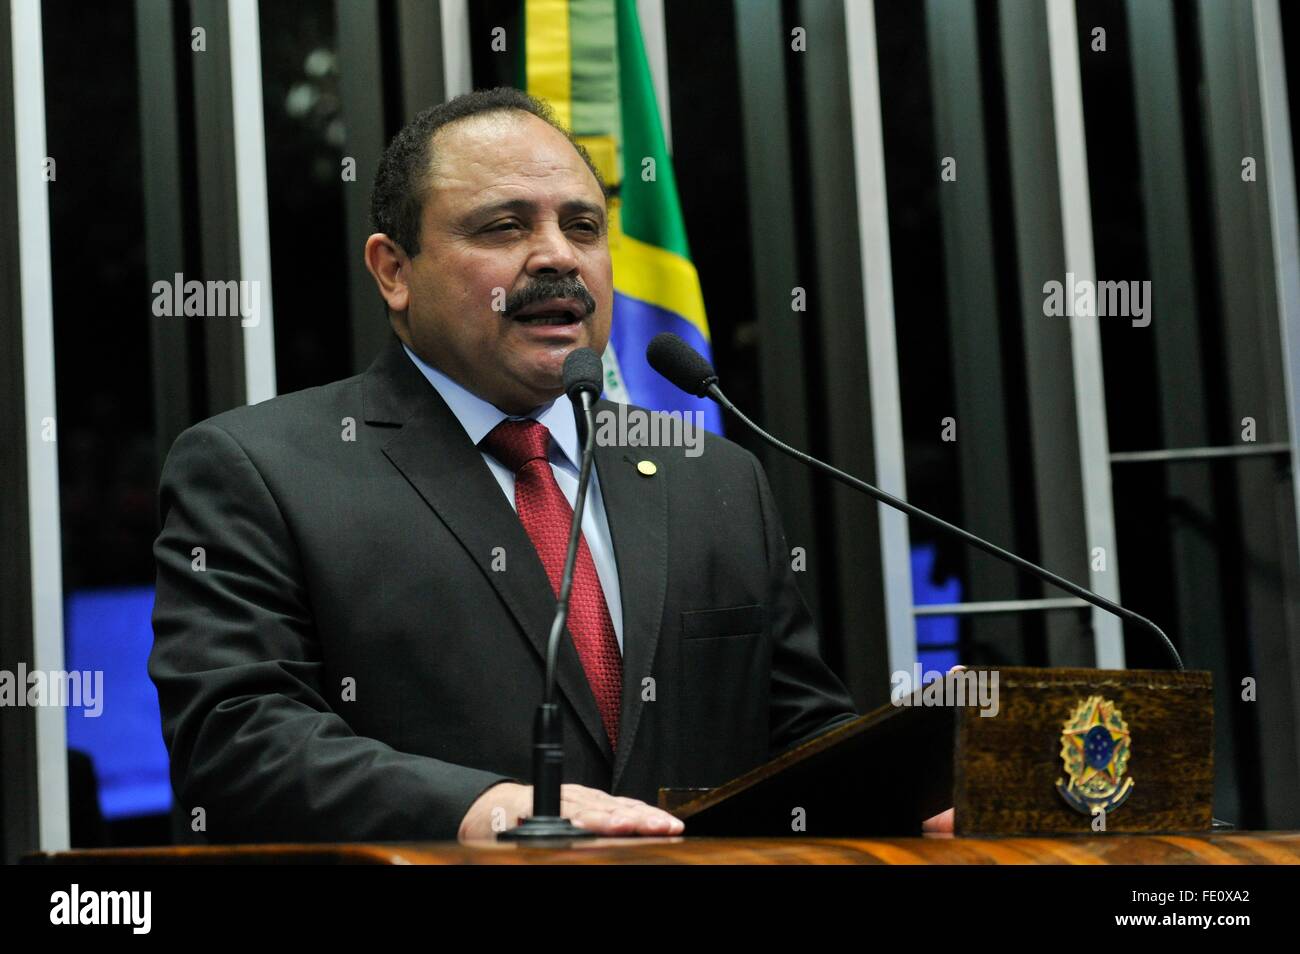 Brazilian First Deputy Chairman of the Senate Waldir Maranhao speaks in the chamber during a session honoring President of the Republic Joo Goulart May 4, 2015 in Brasilia, Brazil. Stock Photo